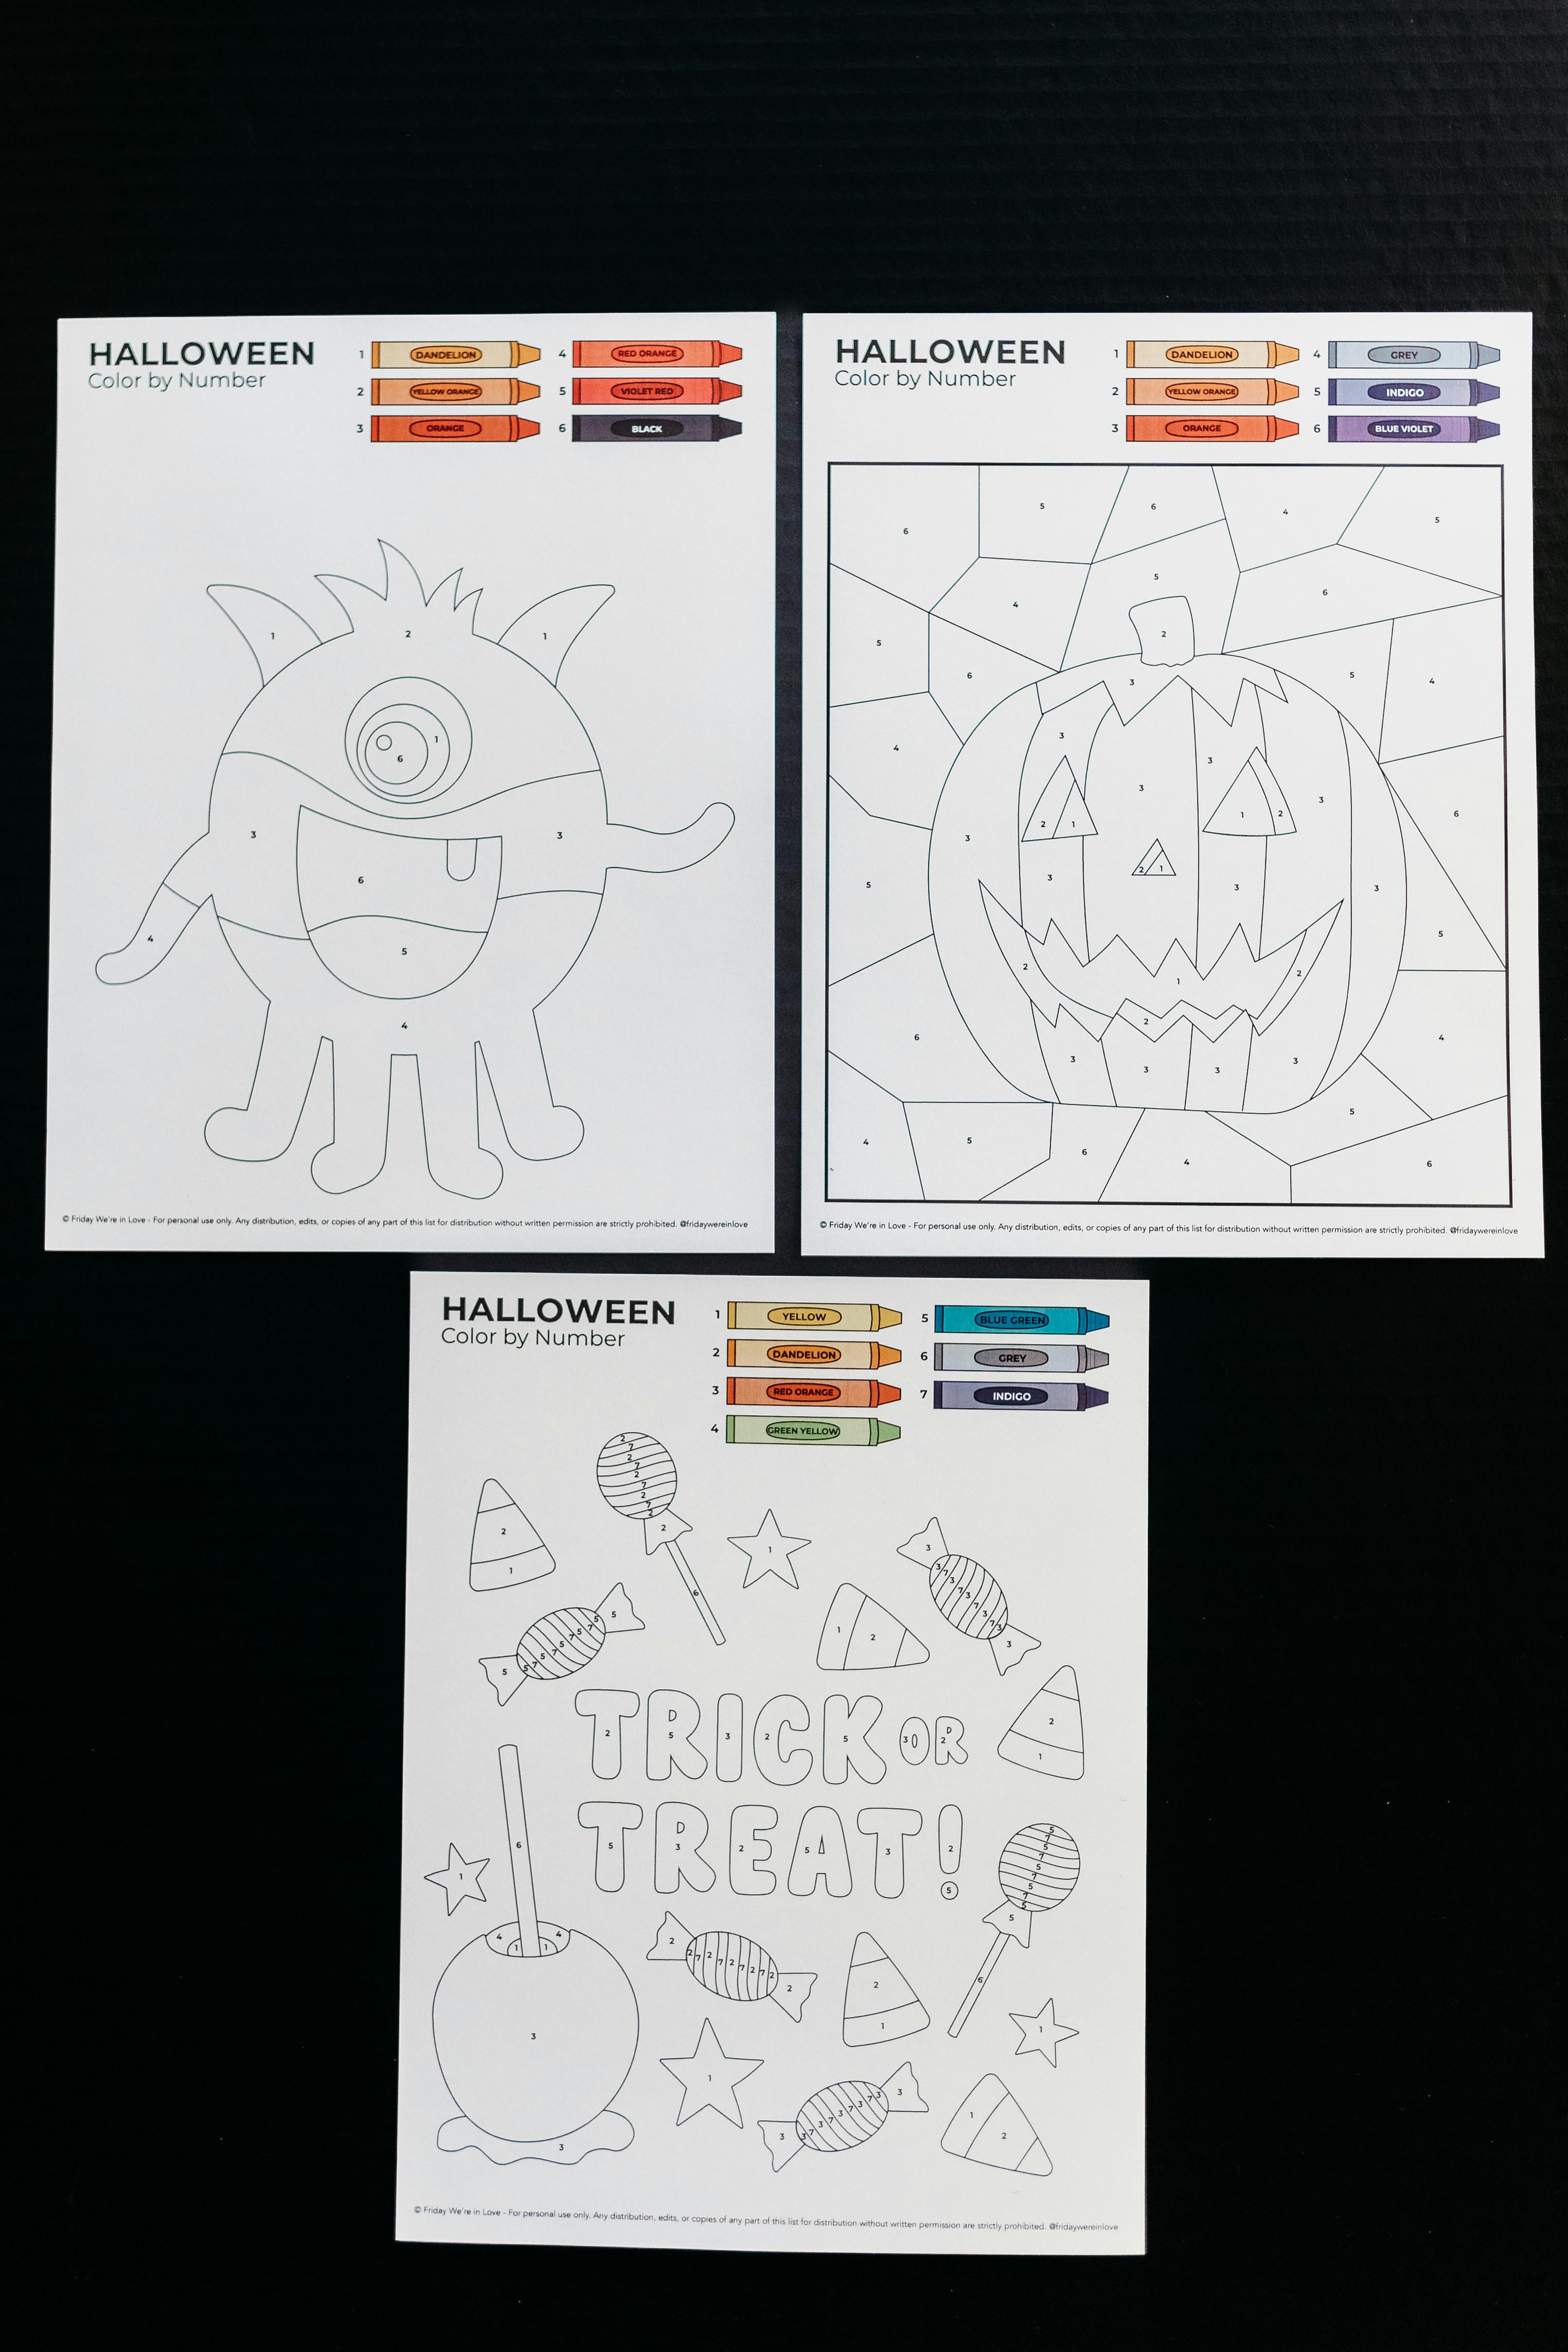 Three versions of Halloween color by number printed and laid side by side on a black background. 